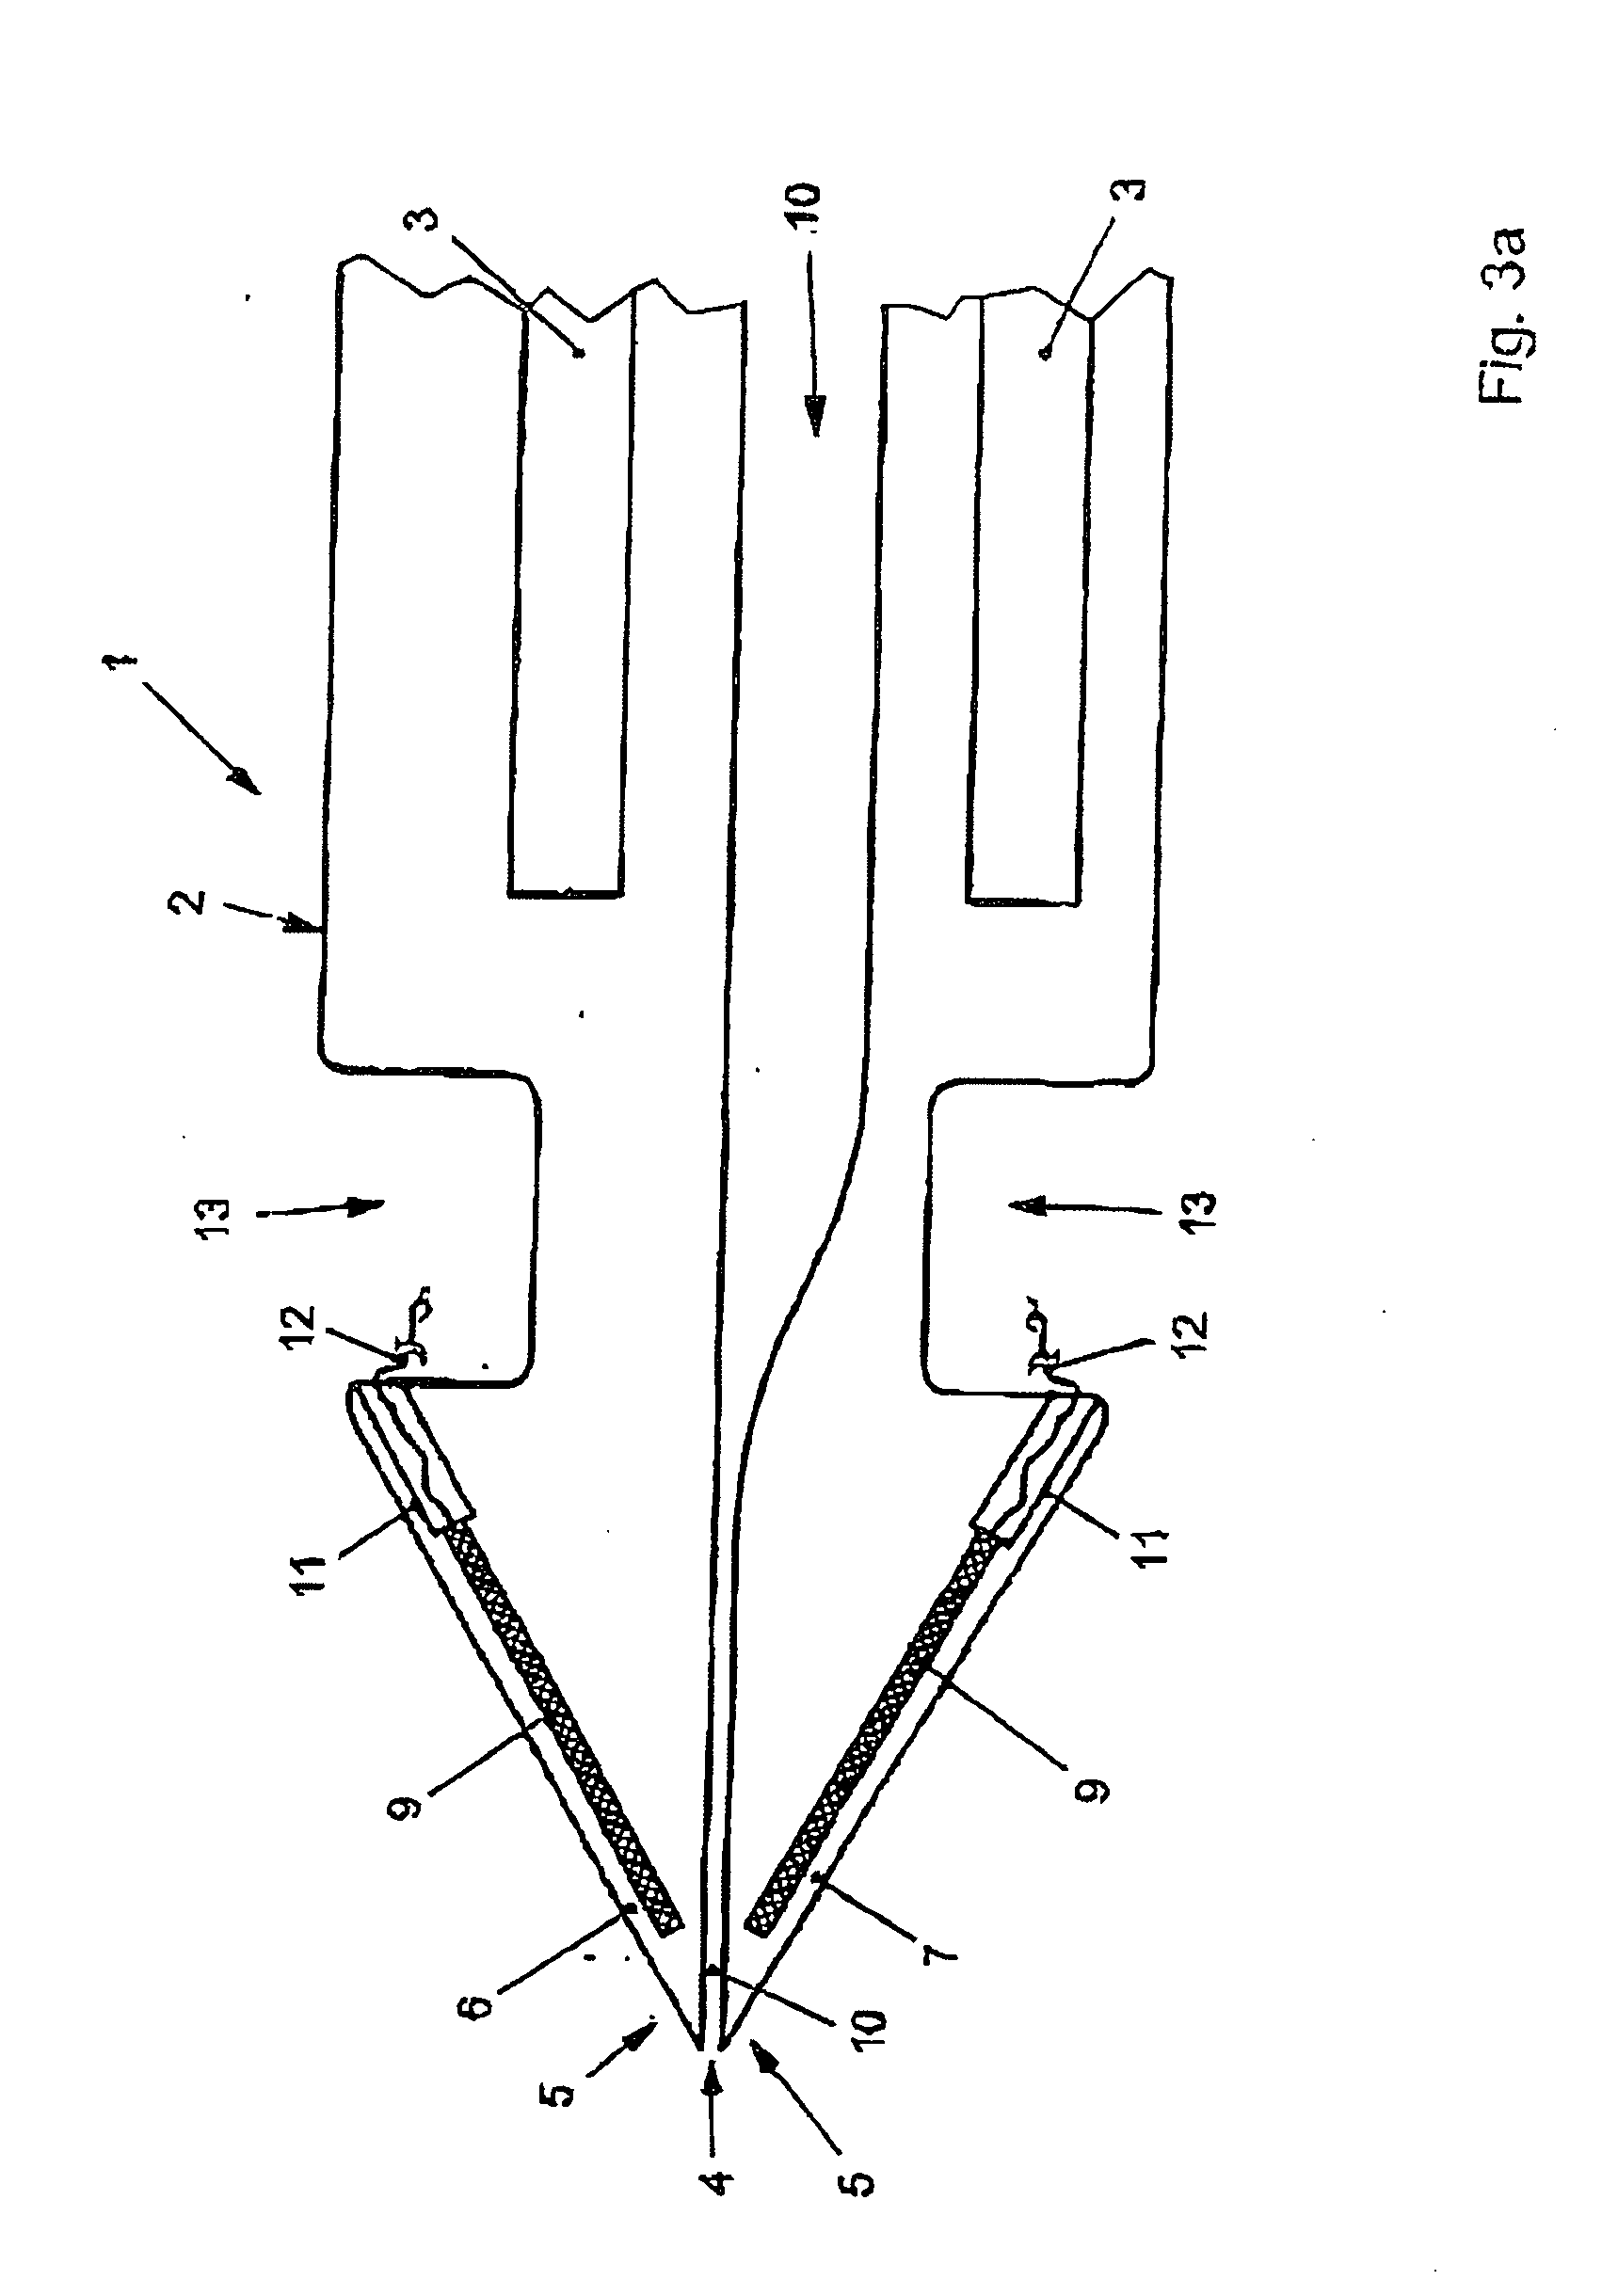 Method of operating extrusion installations for extruding thermoplastics